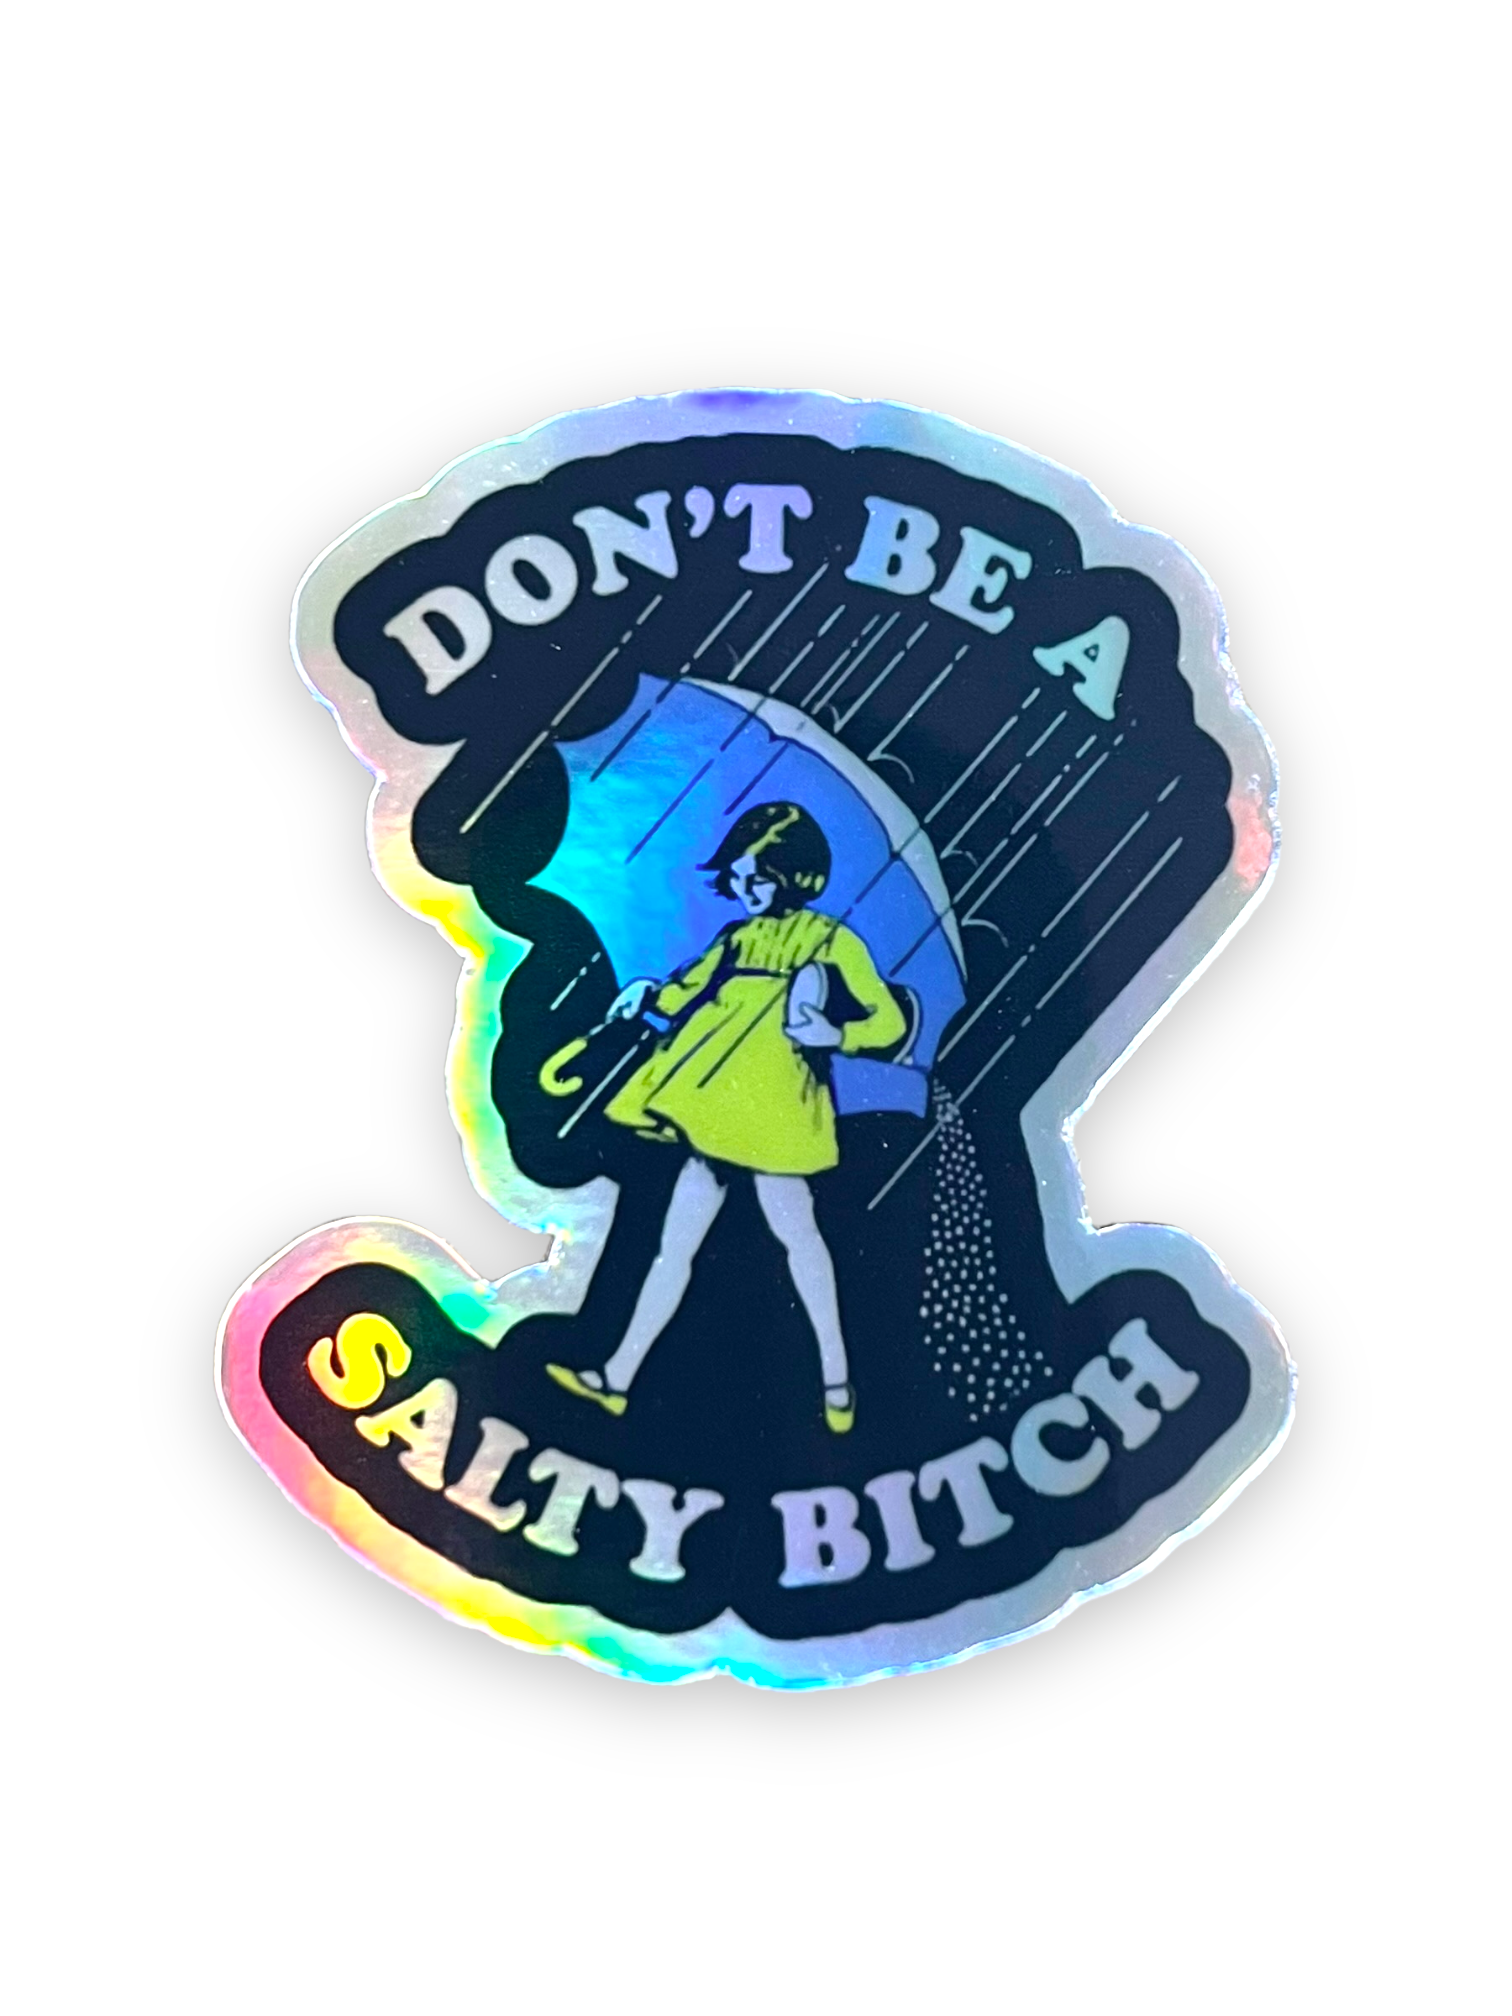 Don't Be A Salty Bitch Holographic, Morton's Salt Girl Sticker by Ace The Pitmatian Sold by Le Monkey House